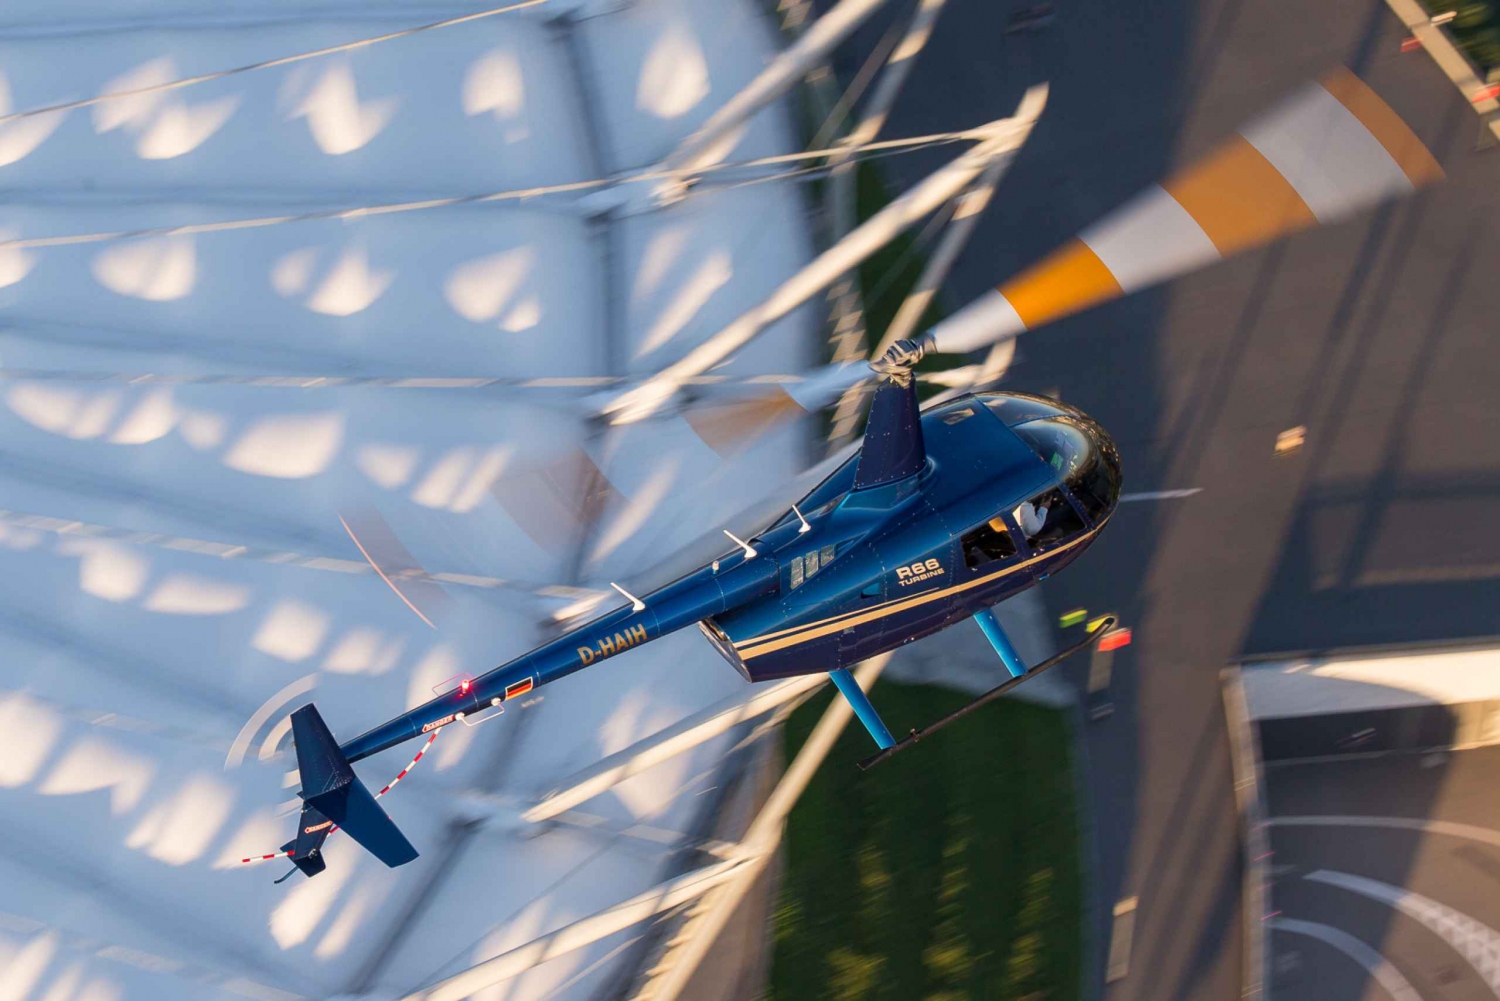 Warsaw: Helicopter Private Tour